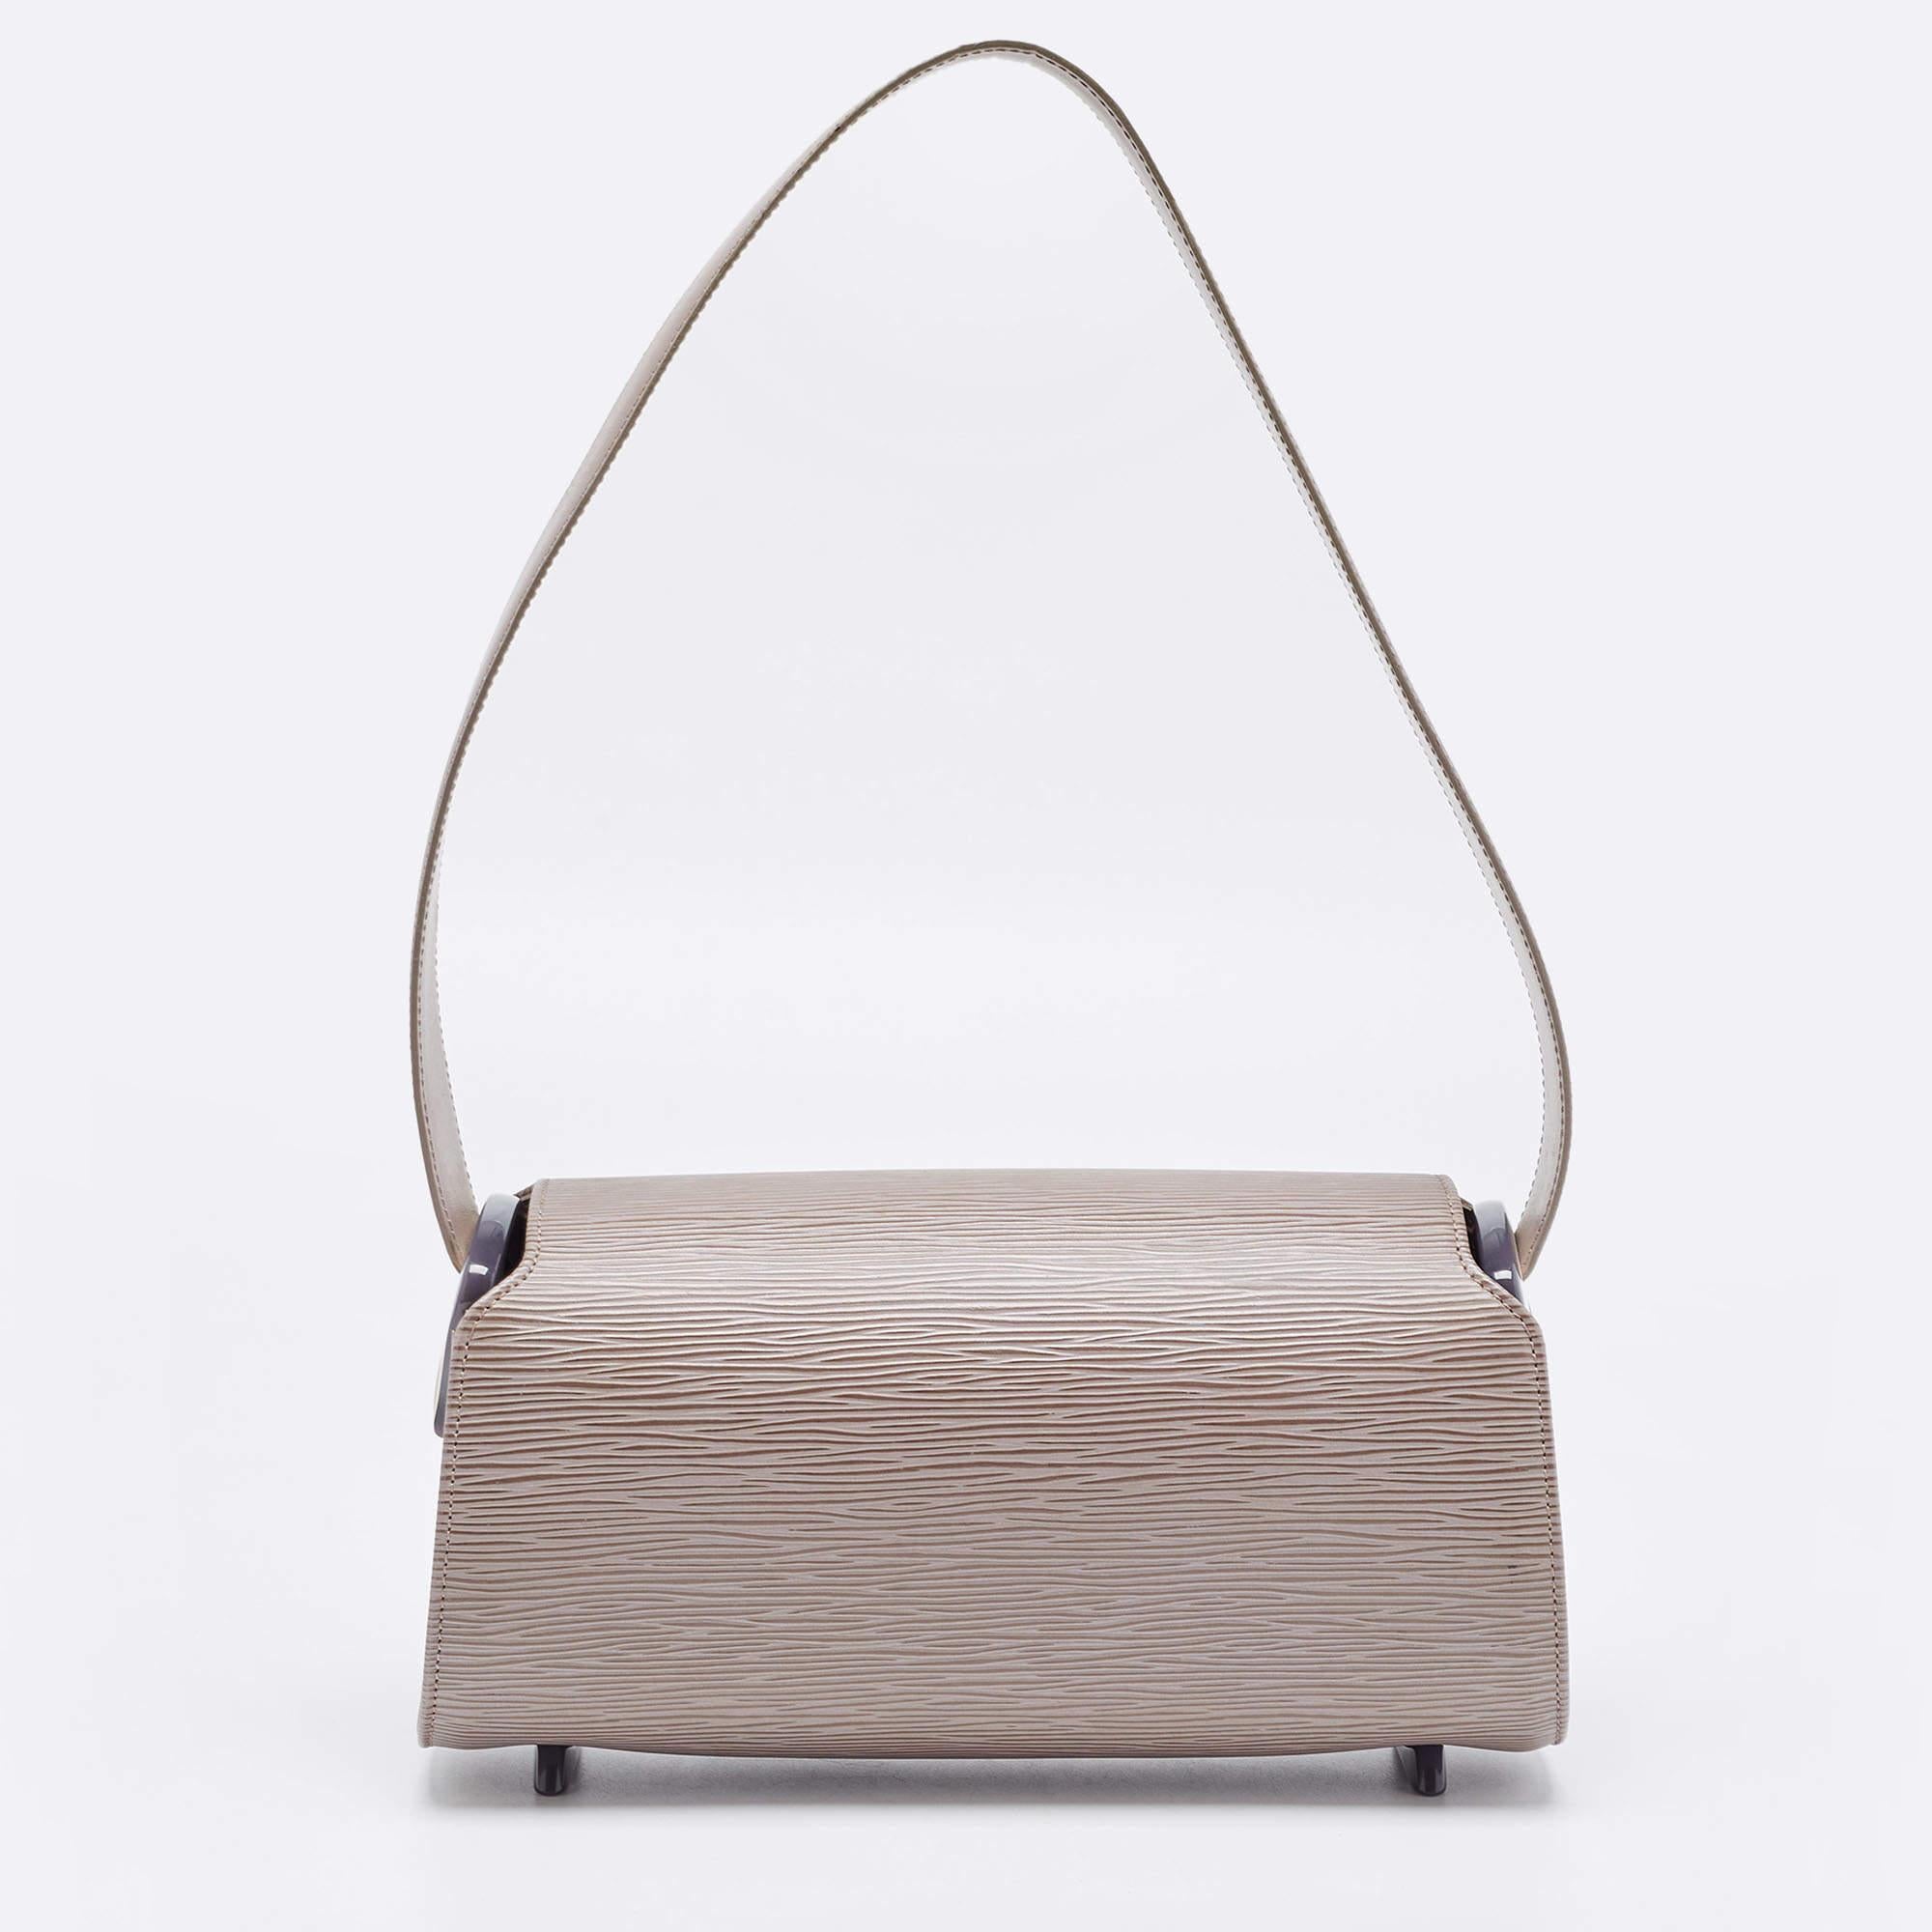 Expertly designed, this Louis Vuitton Nocturne PM bag is an all-time favourite. Crafted from Epi leather, it comes in a lovely shade of lilac. It features a single handle, Alcantara-lined interior sized to house essentials, silver-tone hardware and